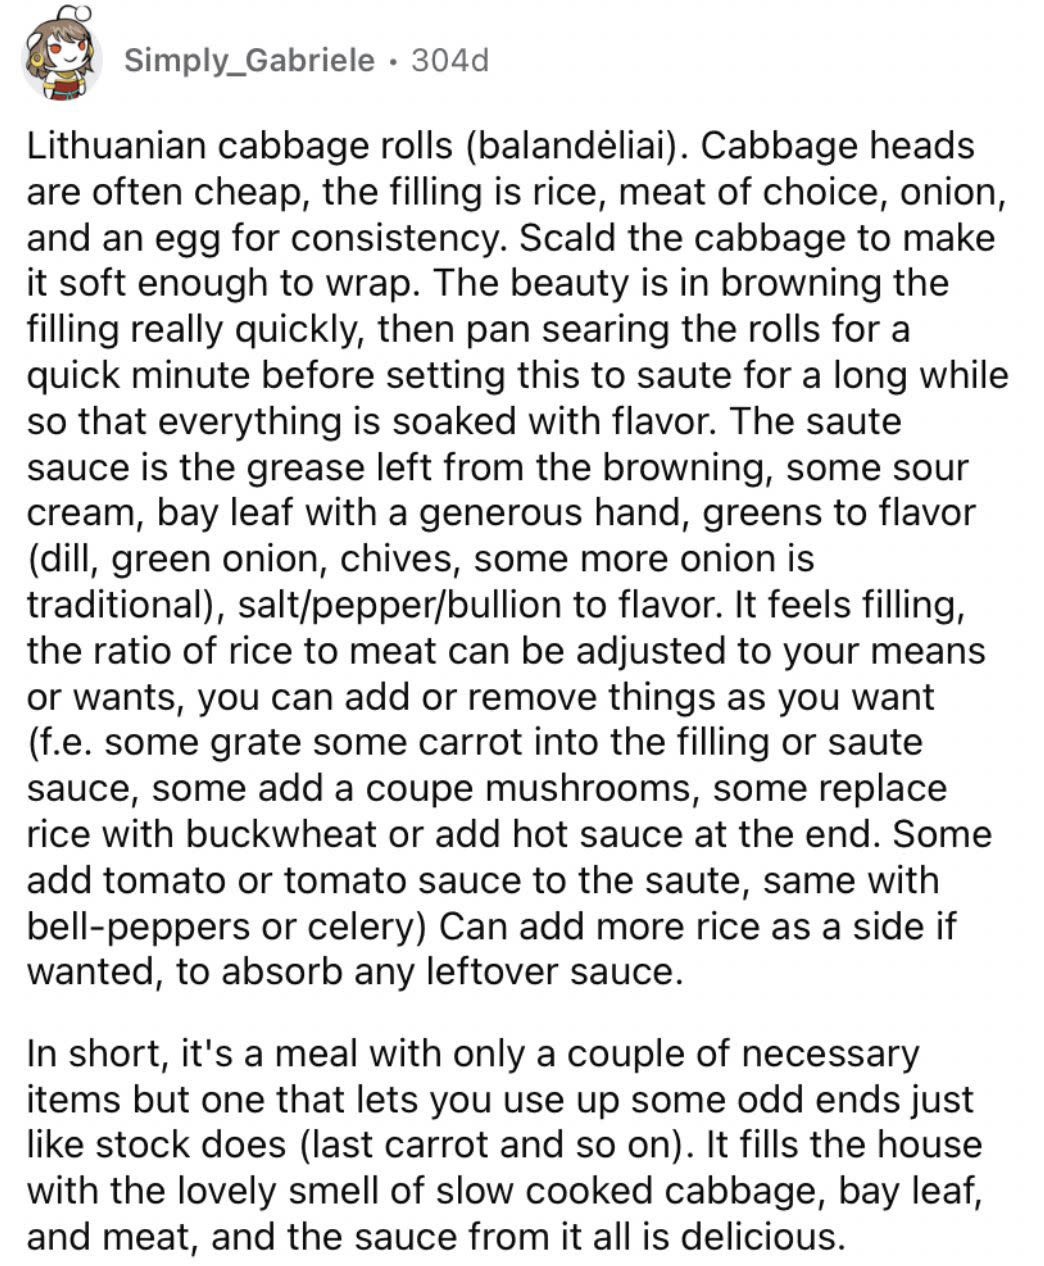 Reddit screenshot about Lithuanian cabbage rolls.